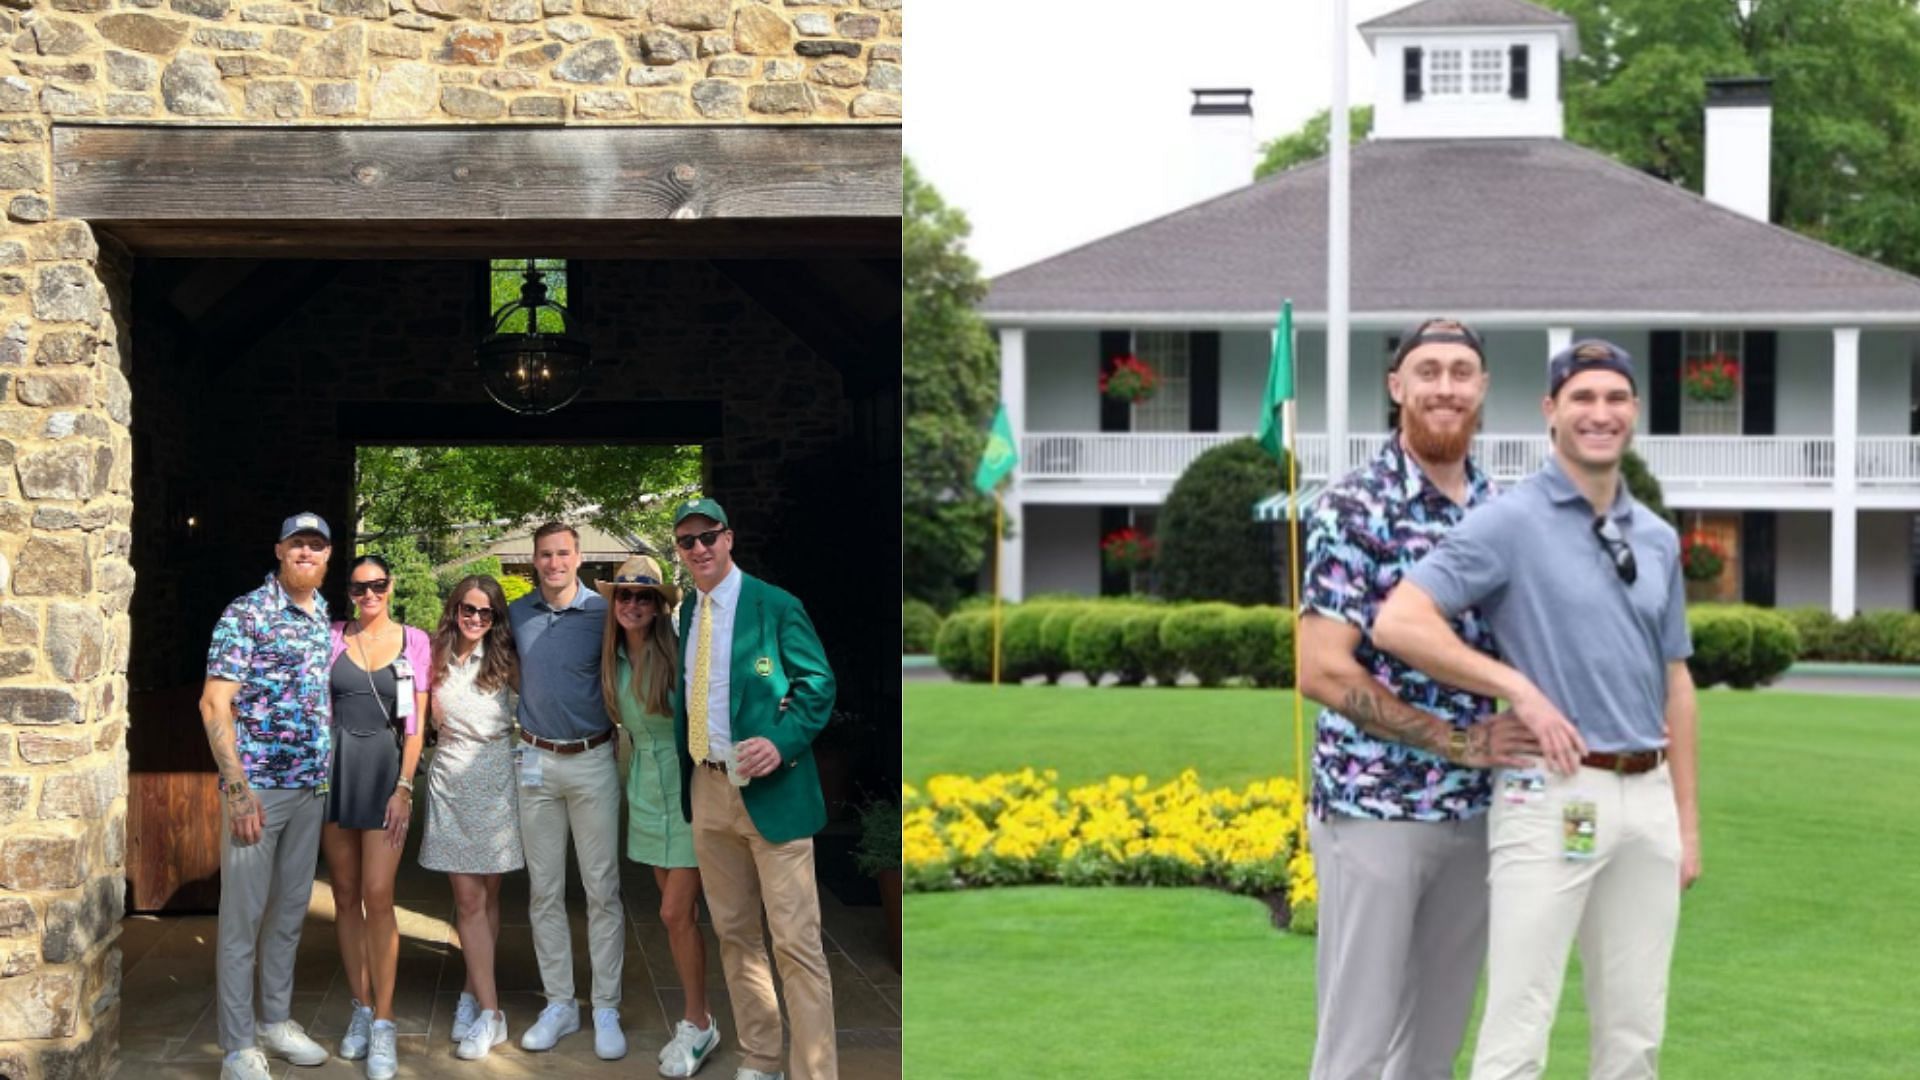 George Kittle met up with Peyton Manning and Kirk Cousins at the Masters.